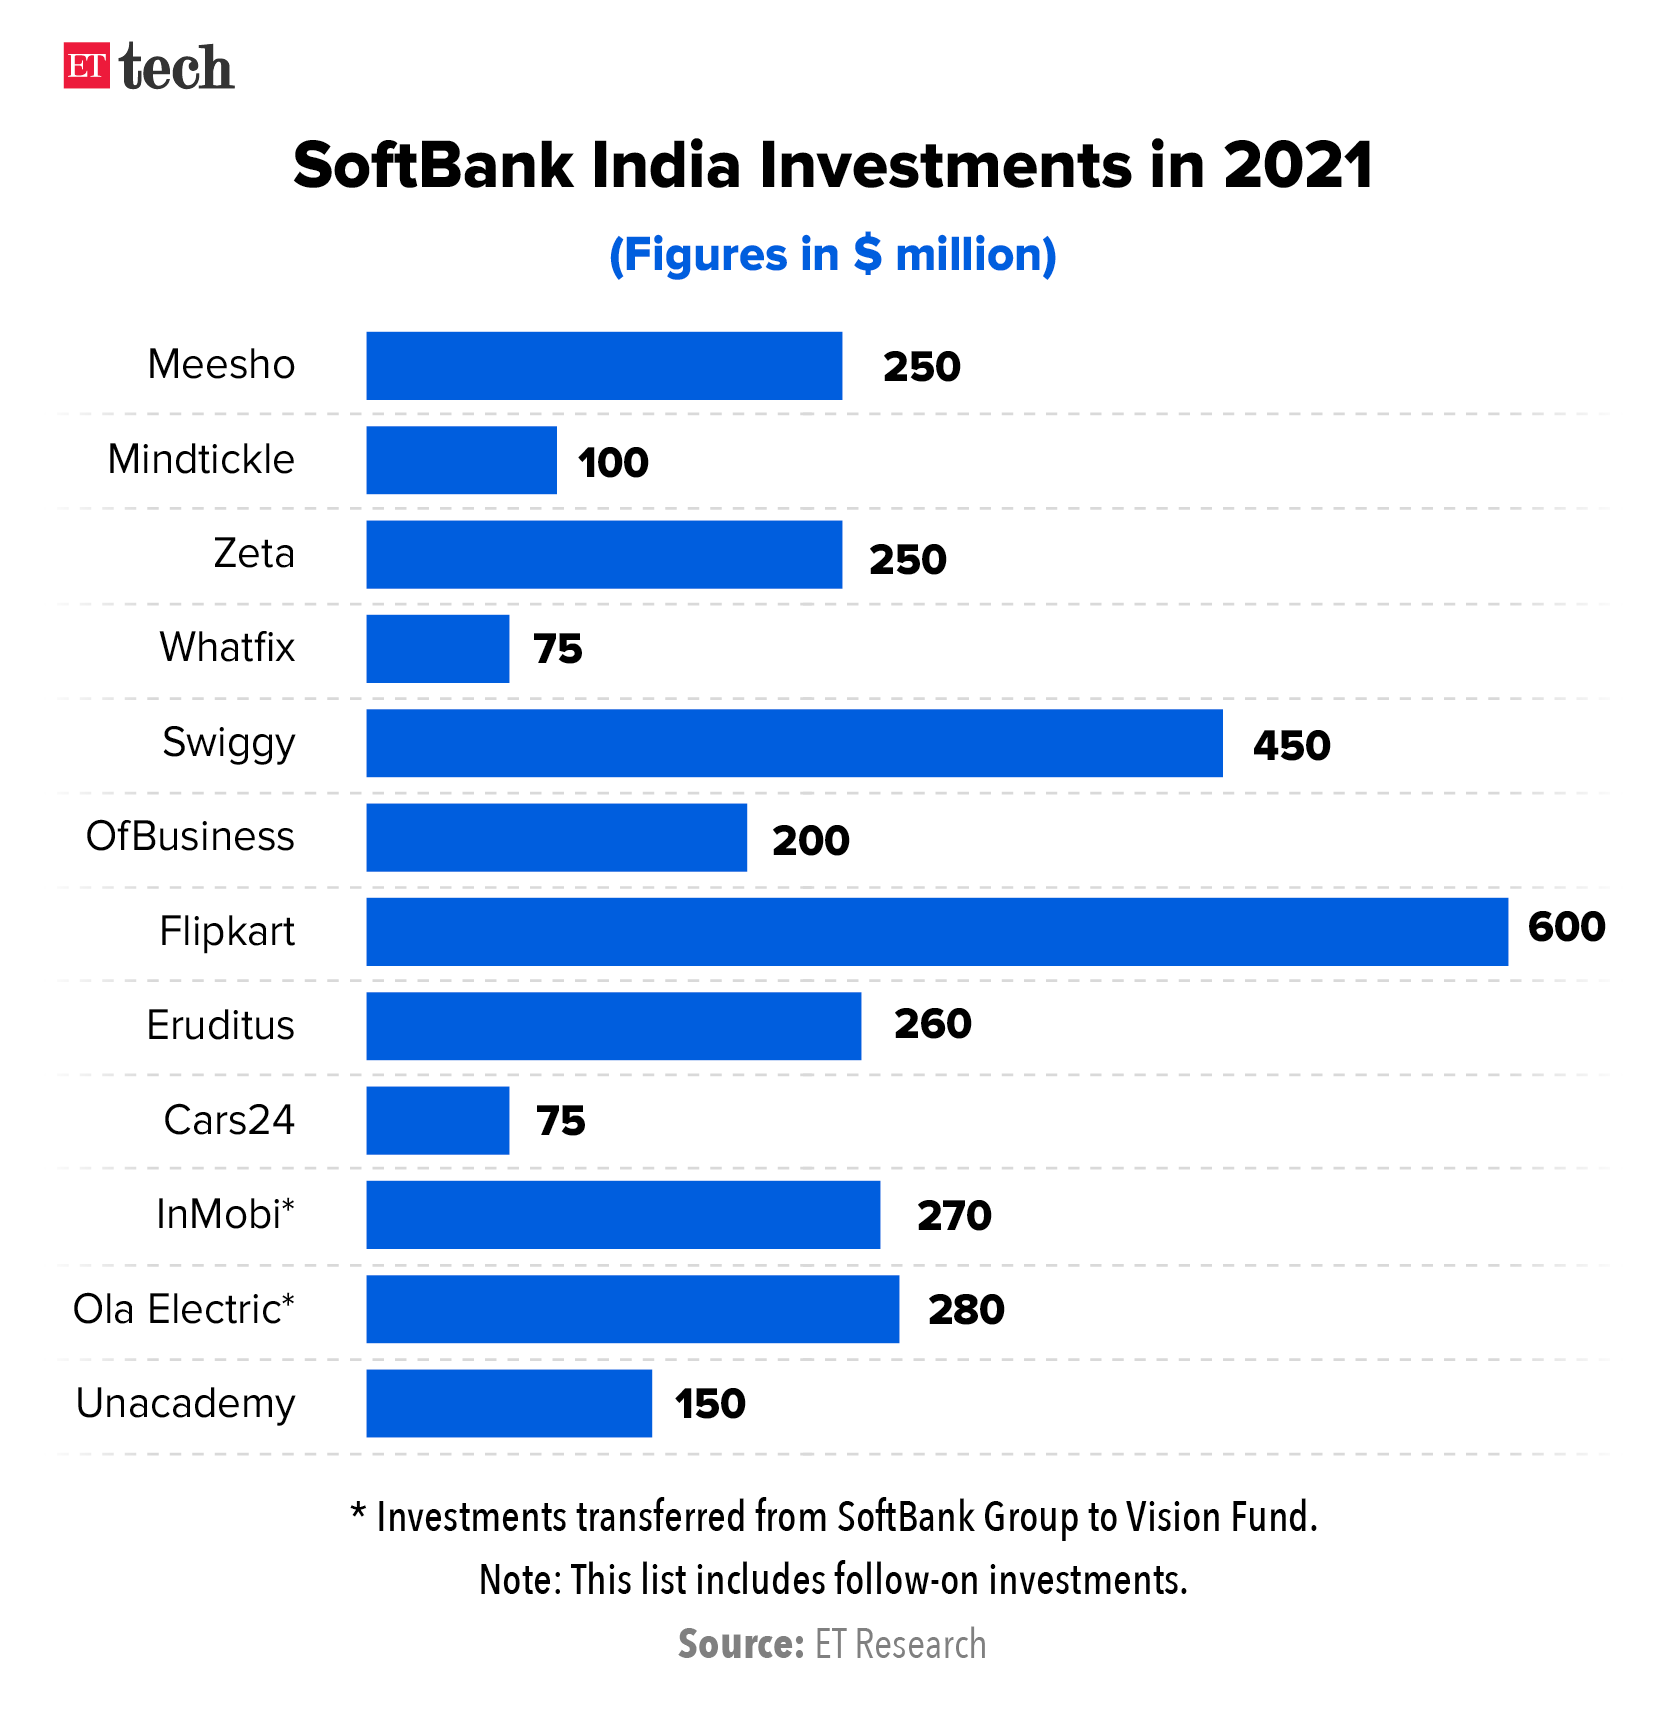 SoftBank India Investments in 2021